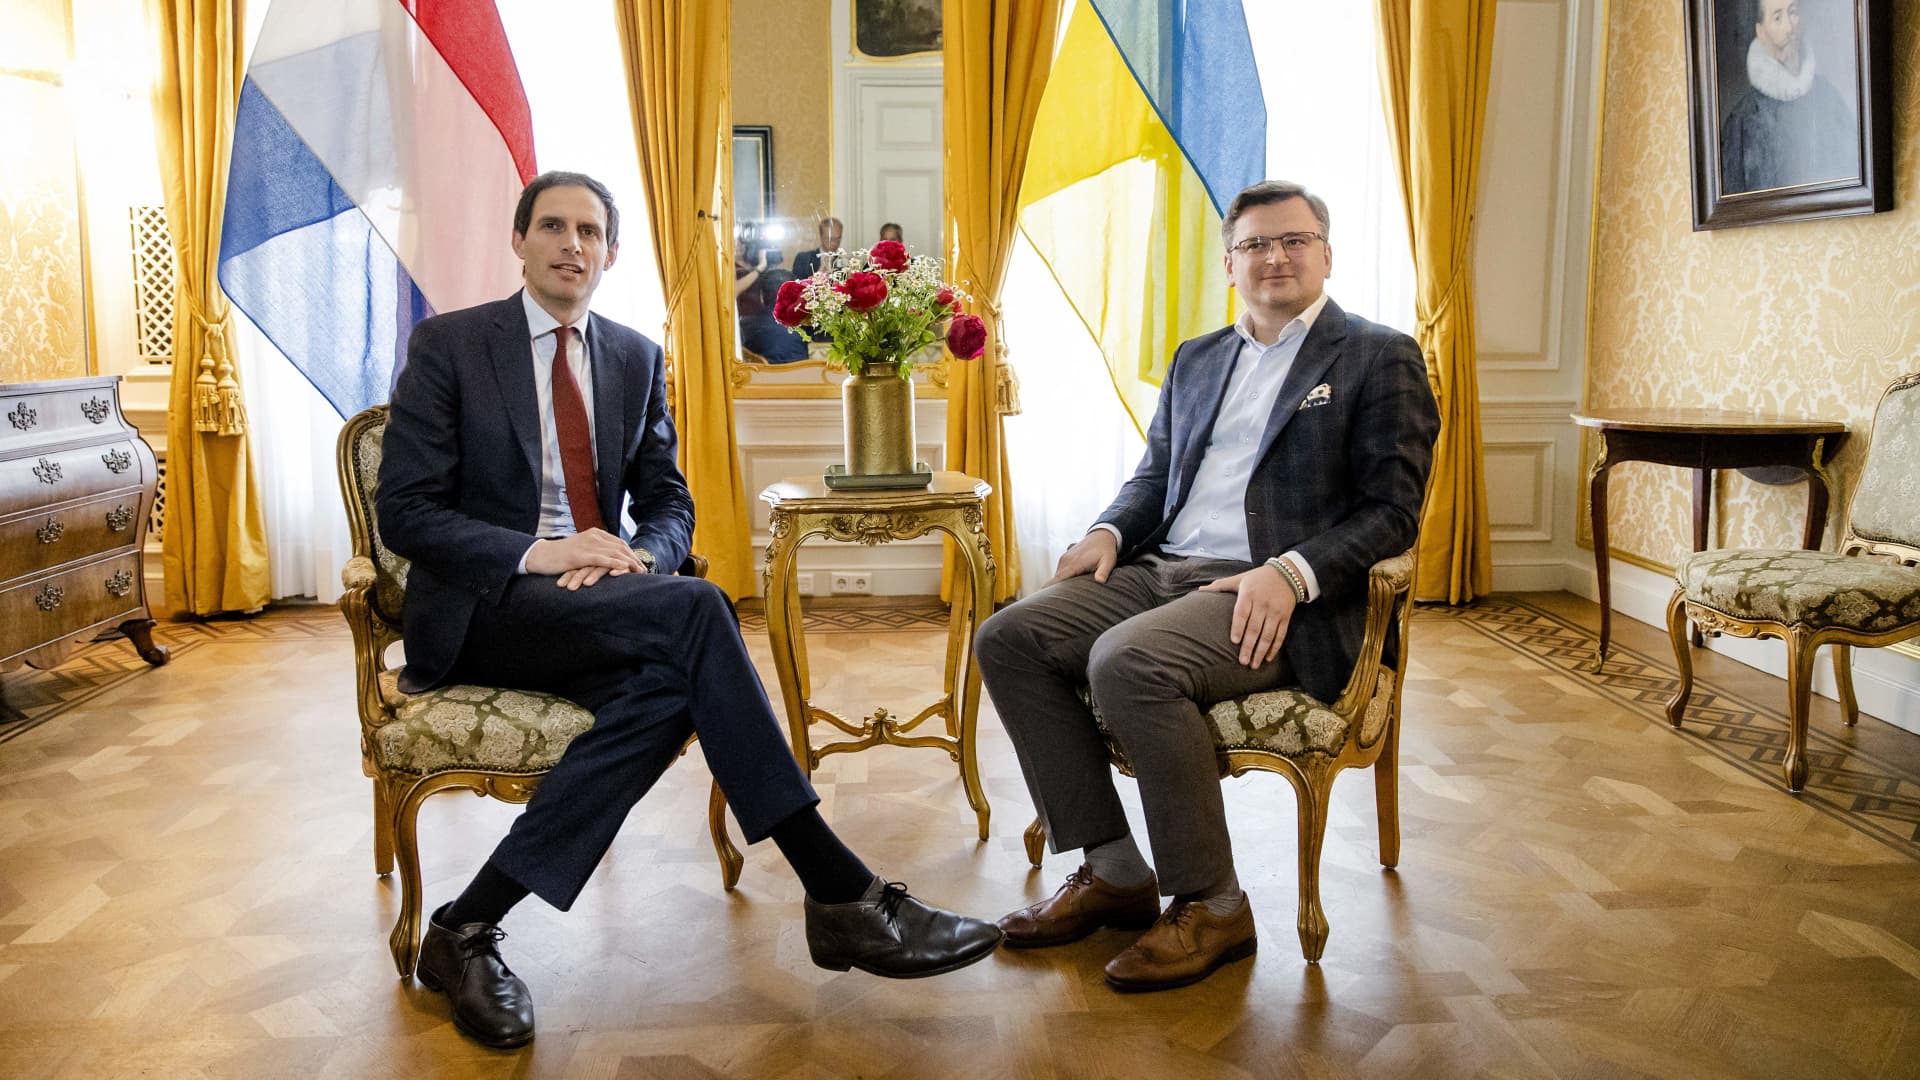 Netherlands' Foreign Affairs Minister Wopke Hoekstra (L) poses during a meeting with Ukrainia's counterpart Dmytro Kuleba (R) in Johan de Withuis in The Hague on May 17, 2022, on the 83rd day of the Russian invasion of Ukraine.